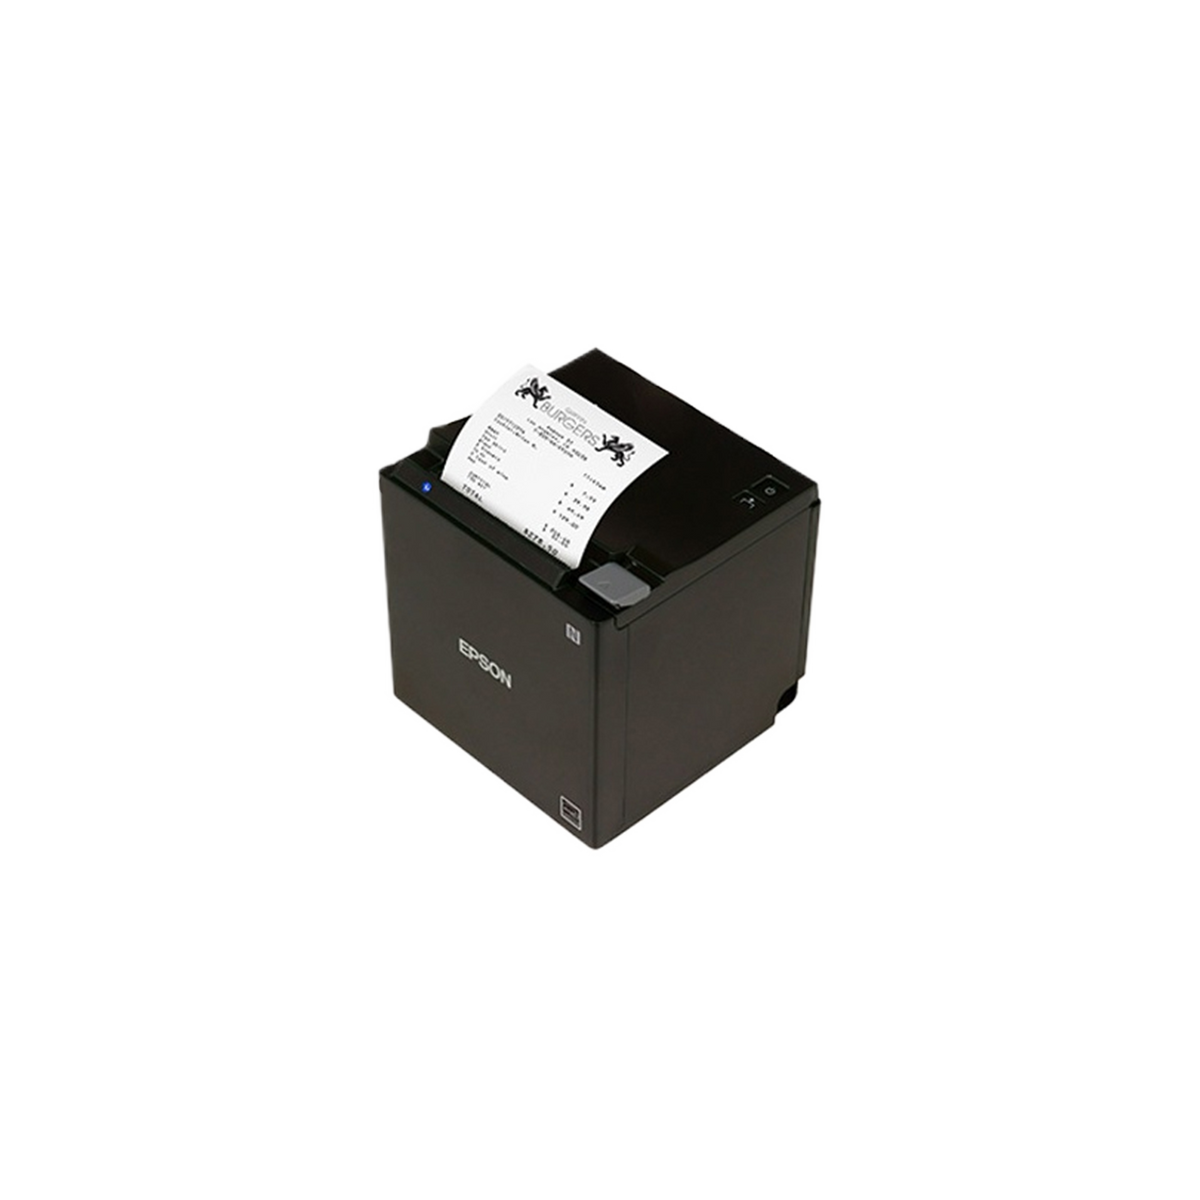 Footpad sagde Farvel Receipt Printers and Papers for Your POS System